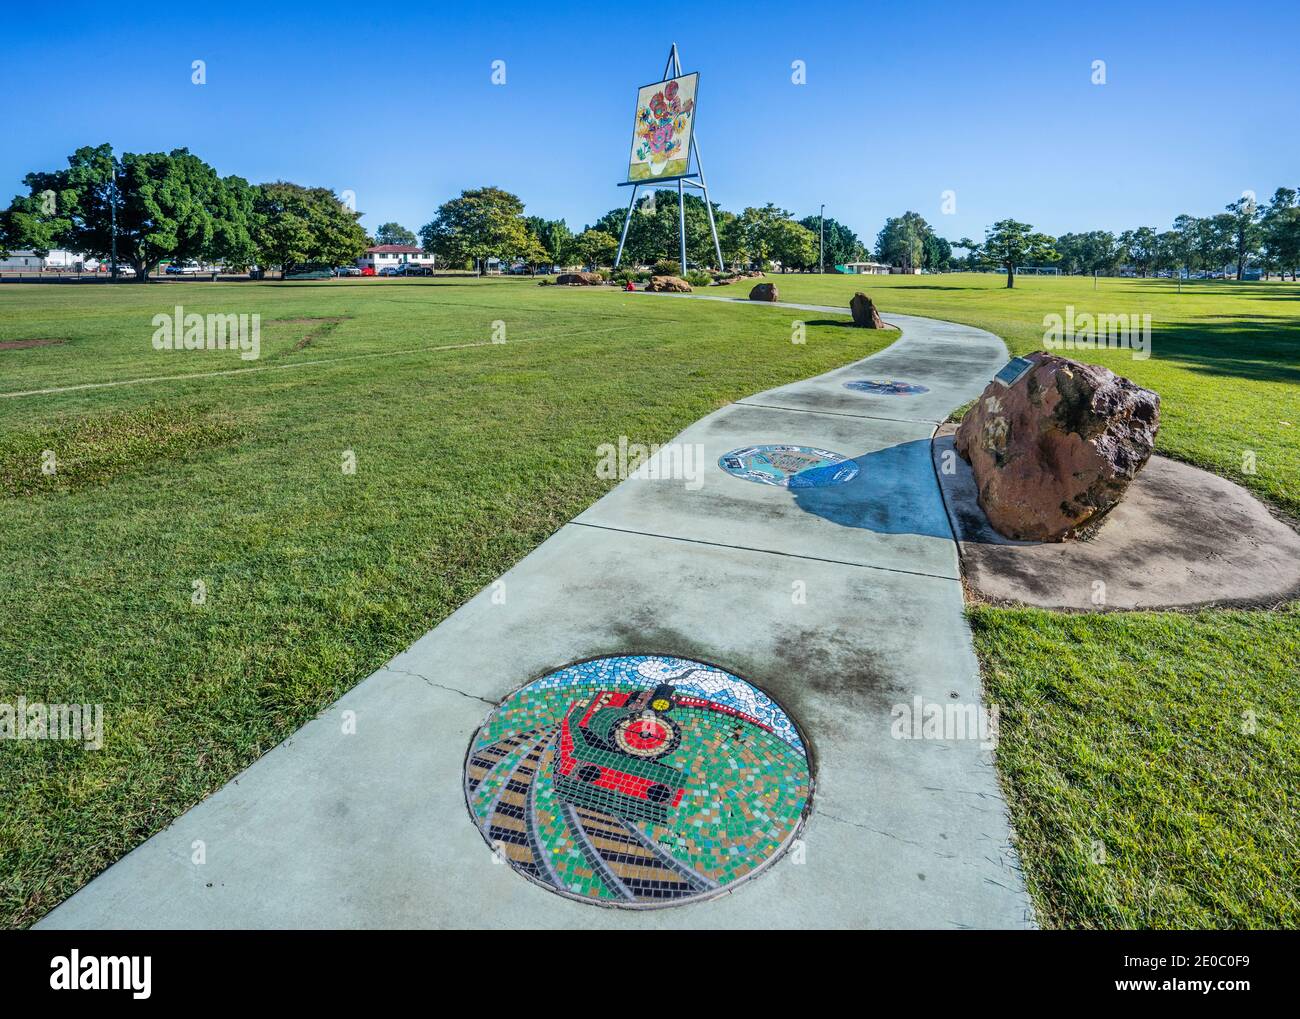 Emerald Centenary of Federation Mosaic Pathway and the Giant Van Gogh Sunflower on the Big Easel in Morton Park, Emerald, Central Highlands Region, Qu Stock Photo